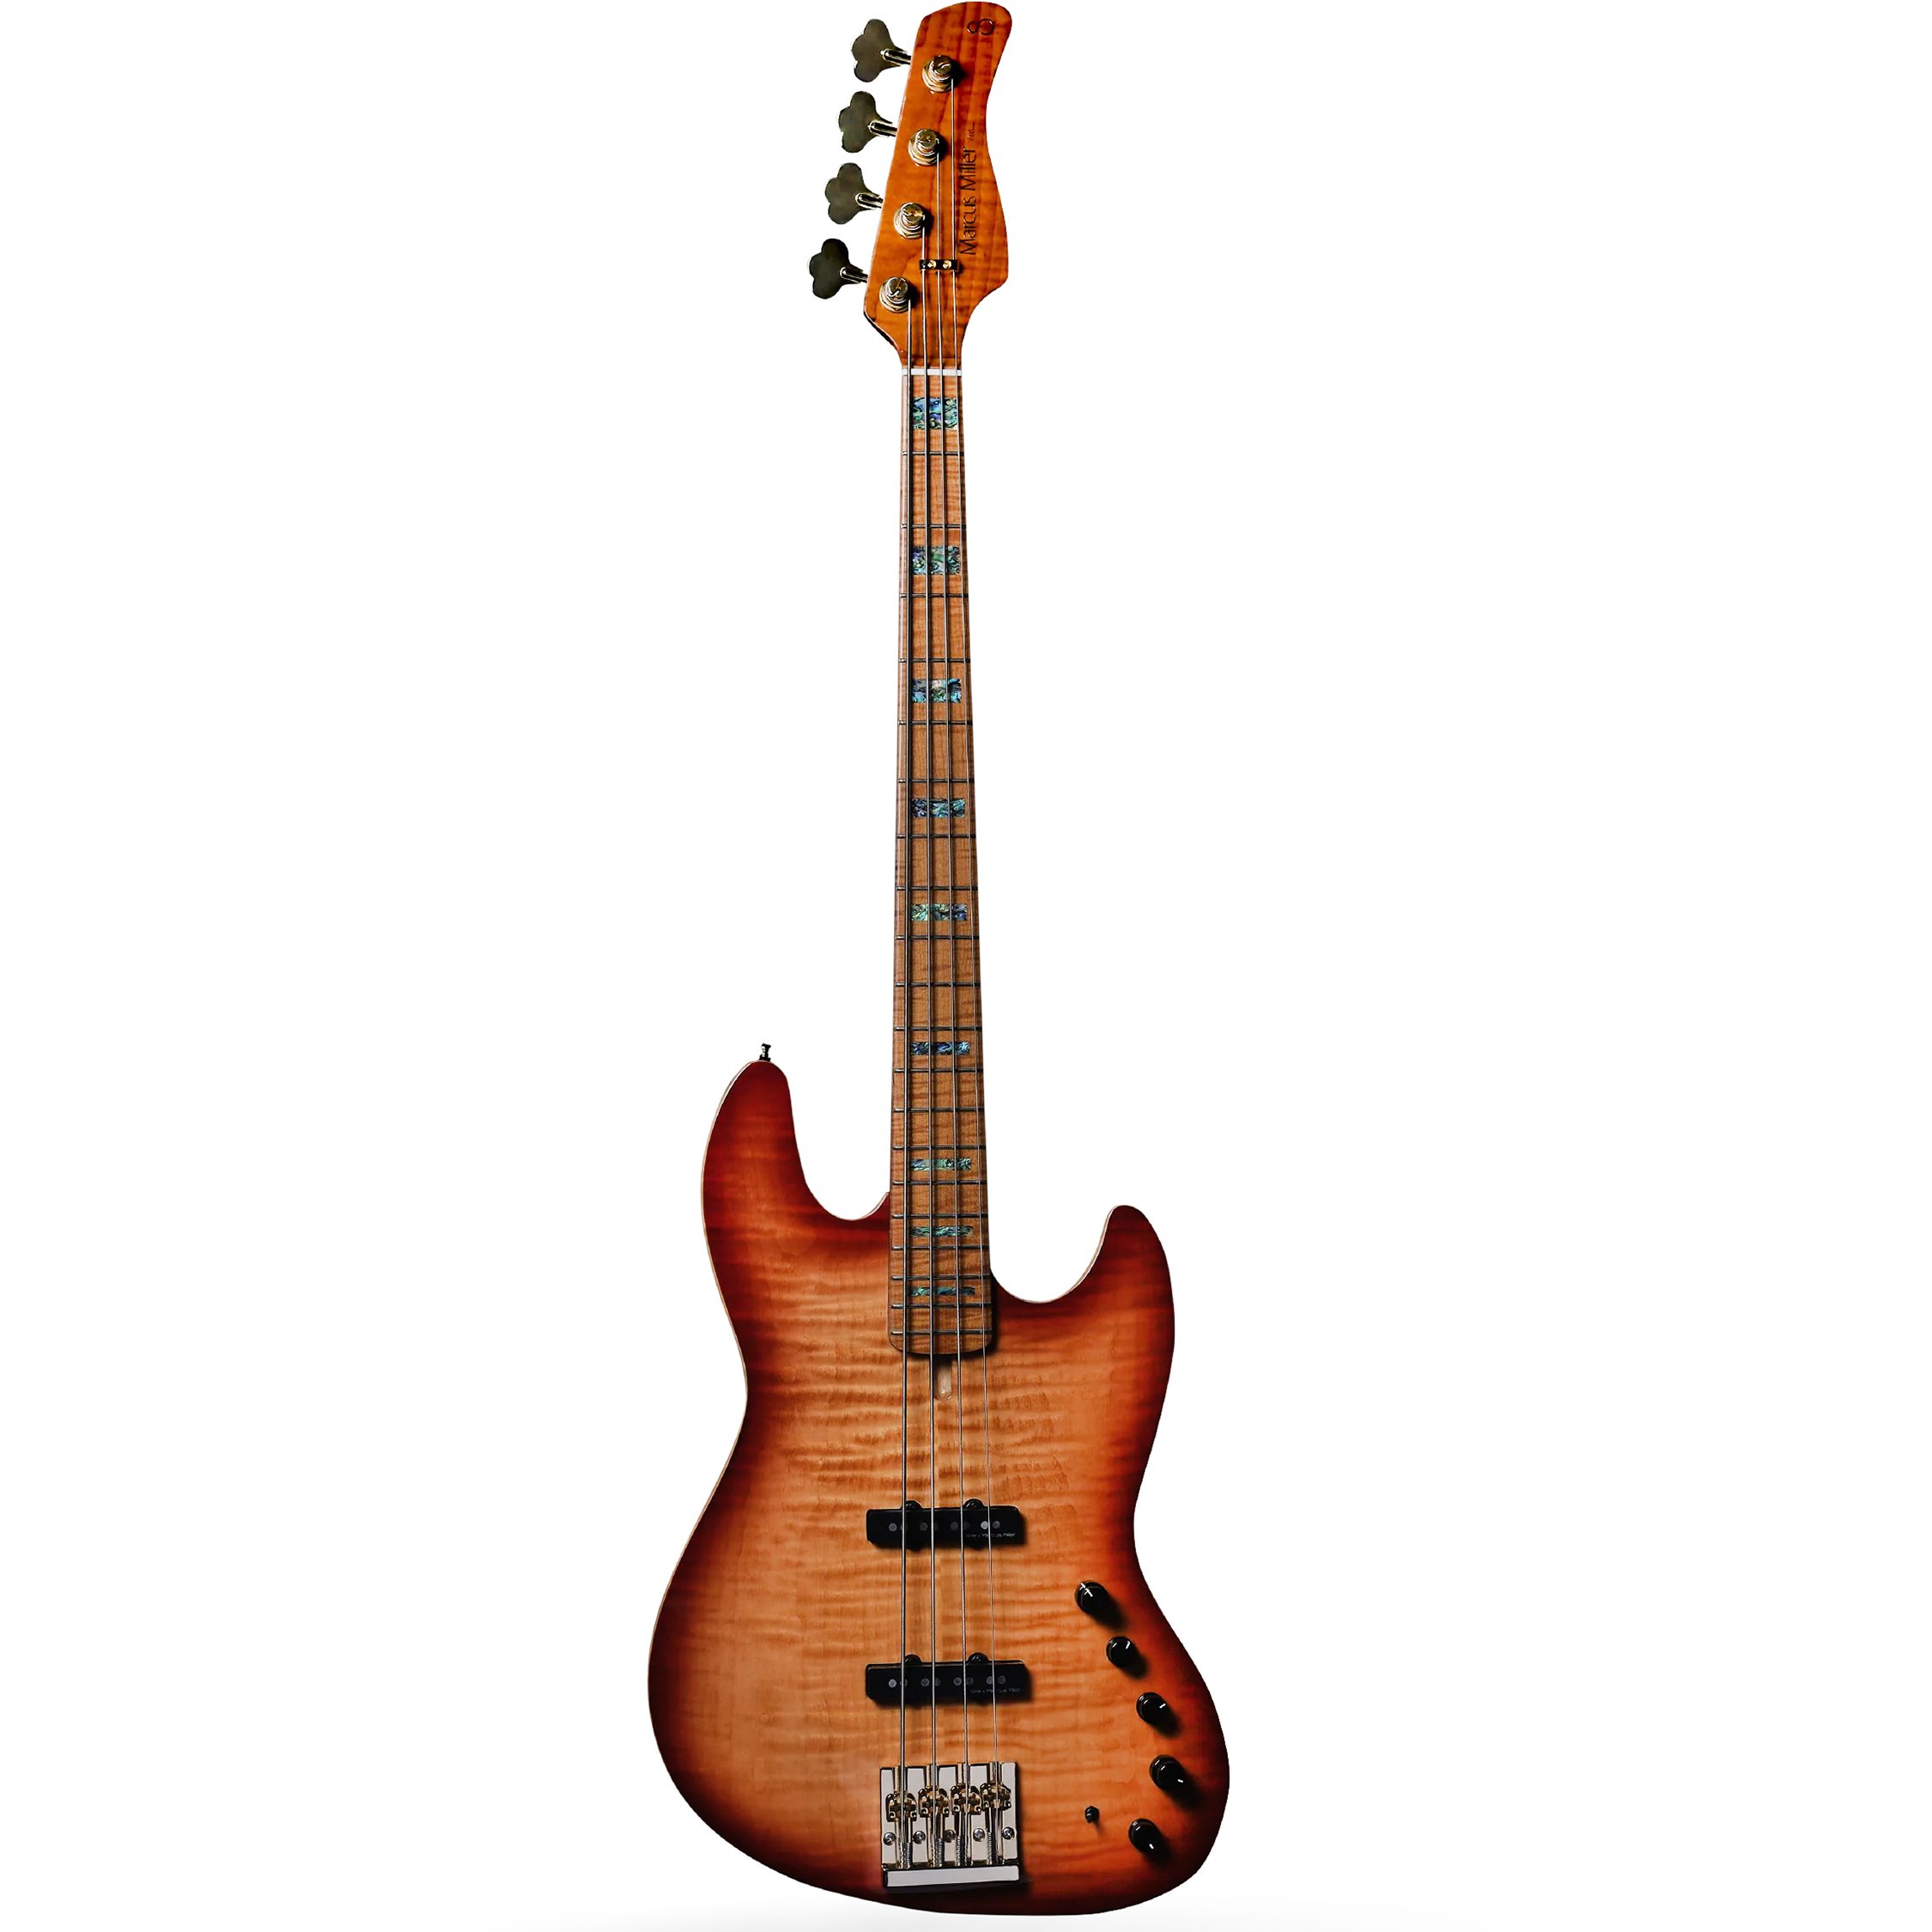 Sire Marcus Miller V10DX (TS)